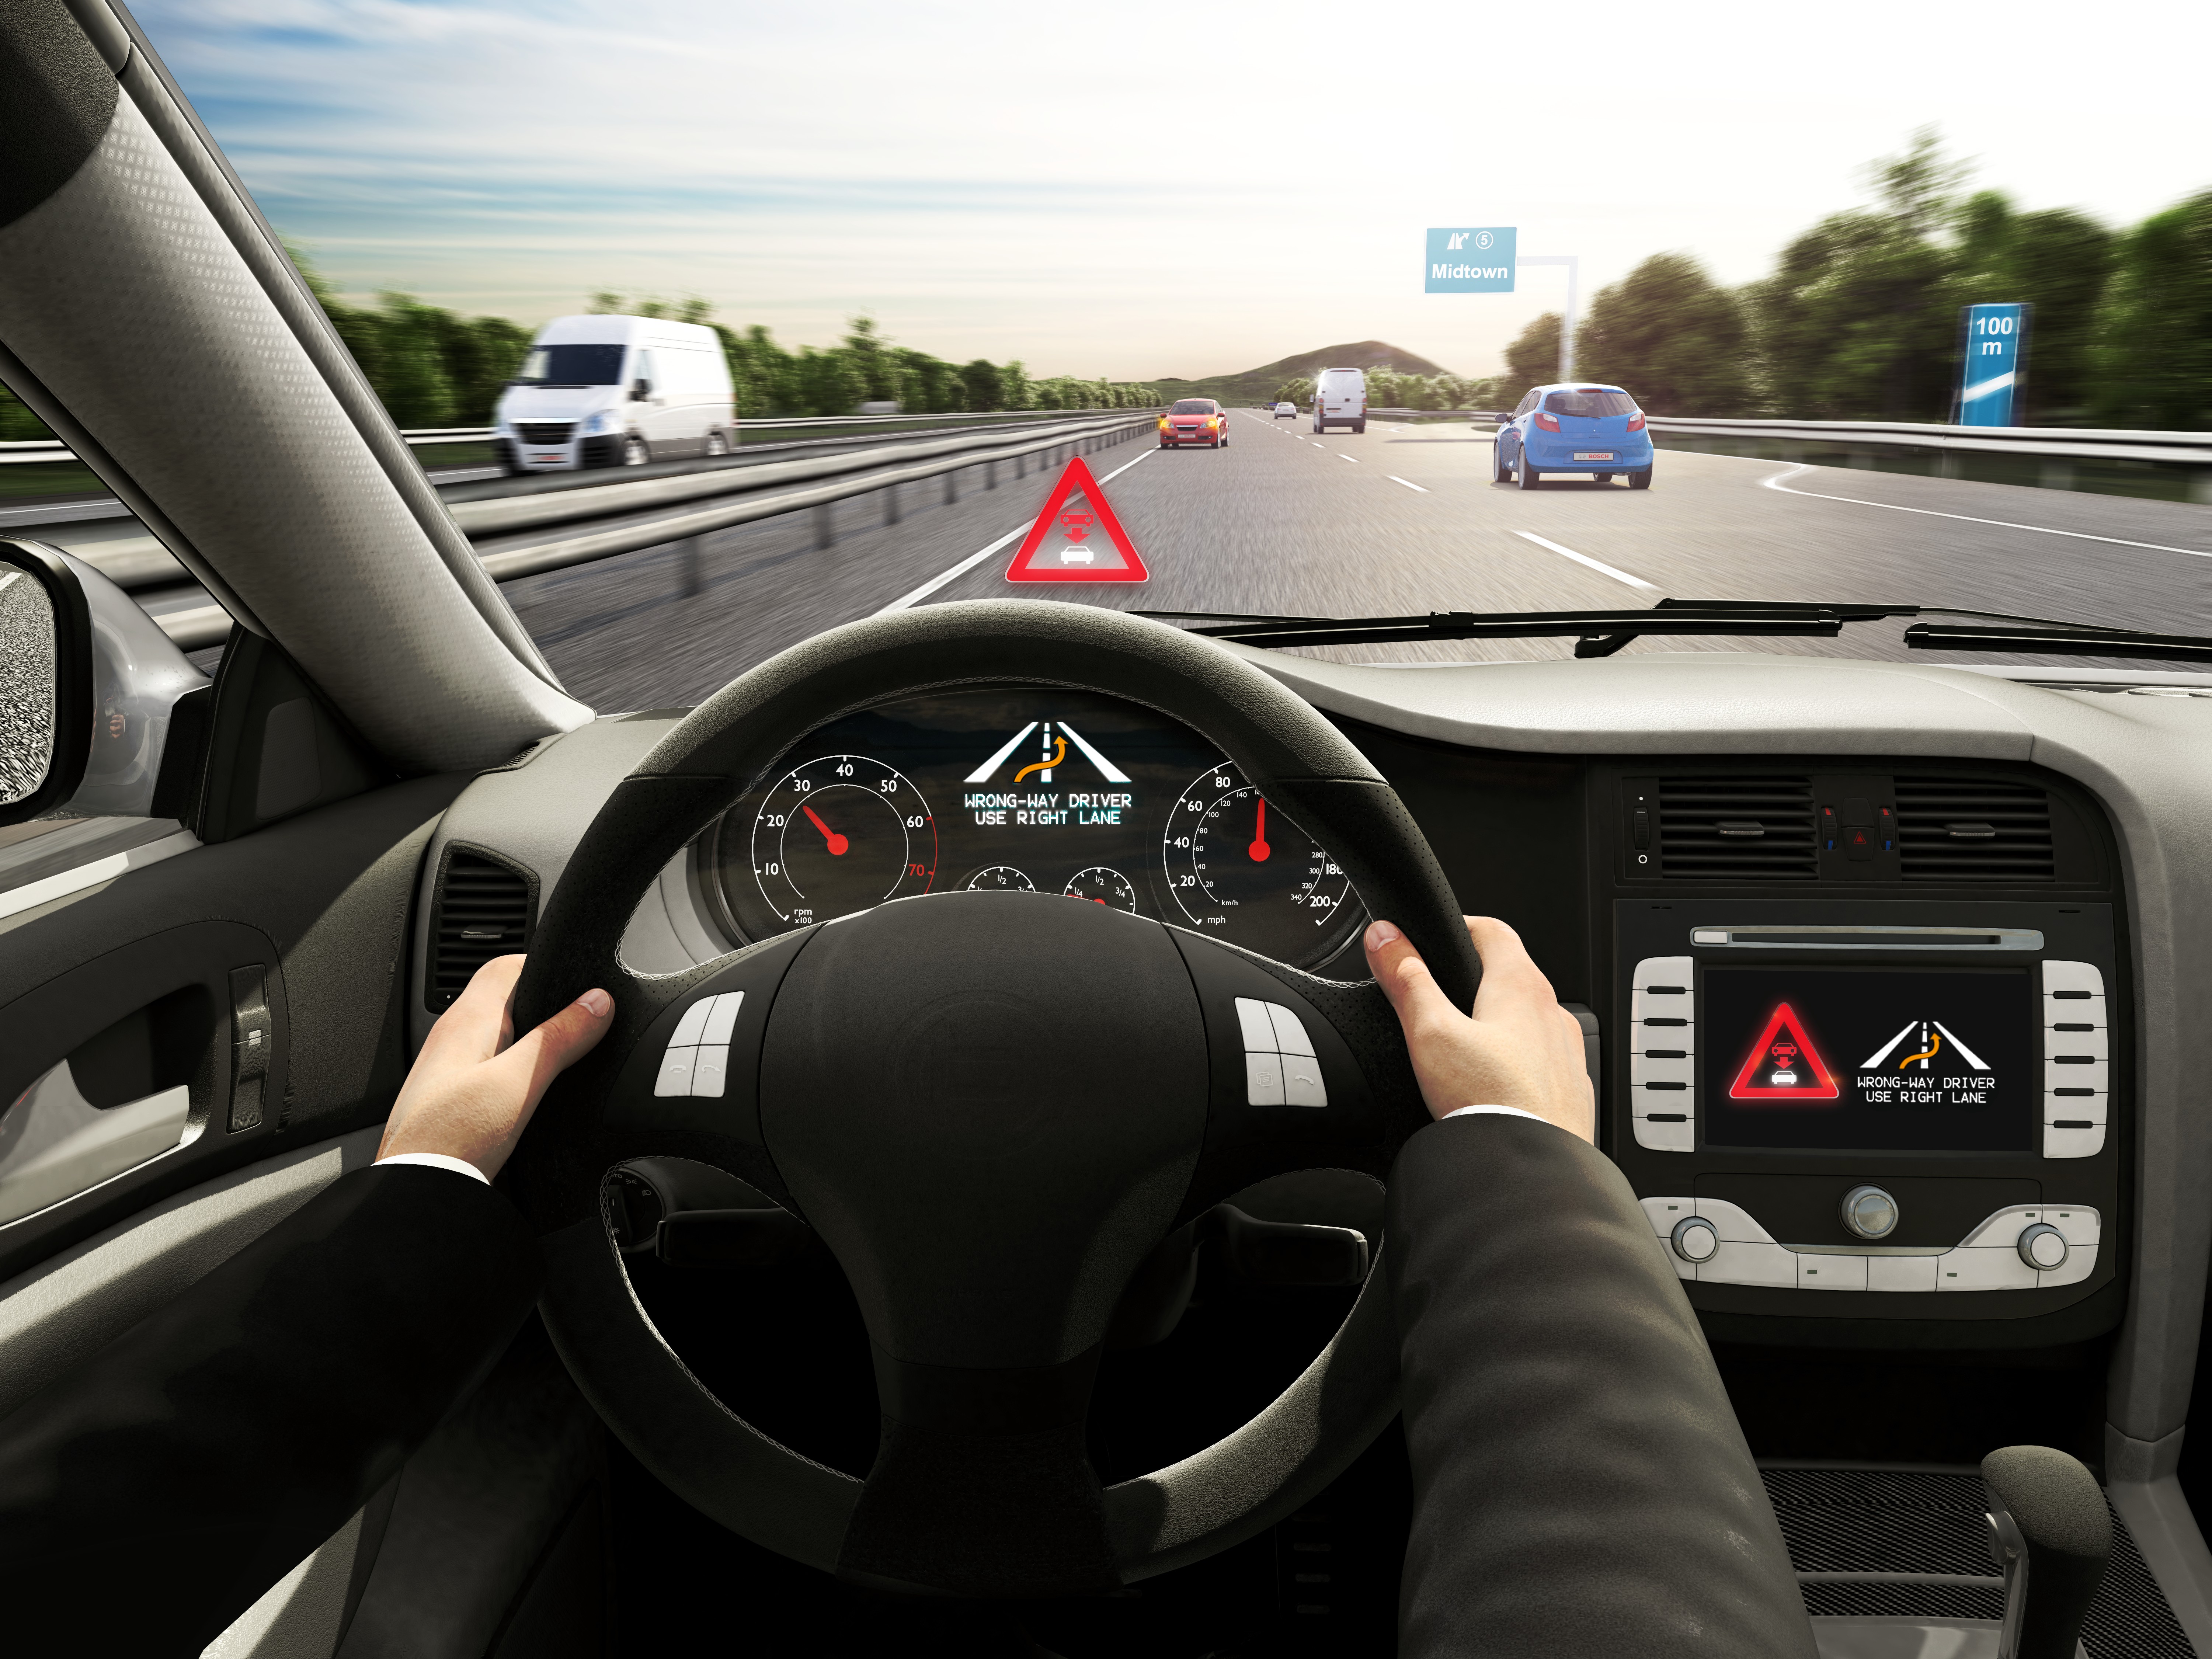 Cloud-based wrong-way driver warning from Bosch 